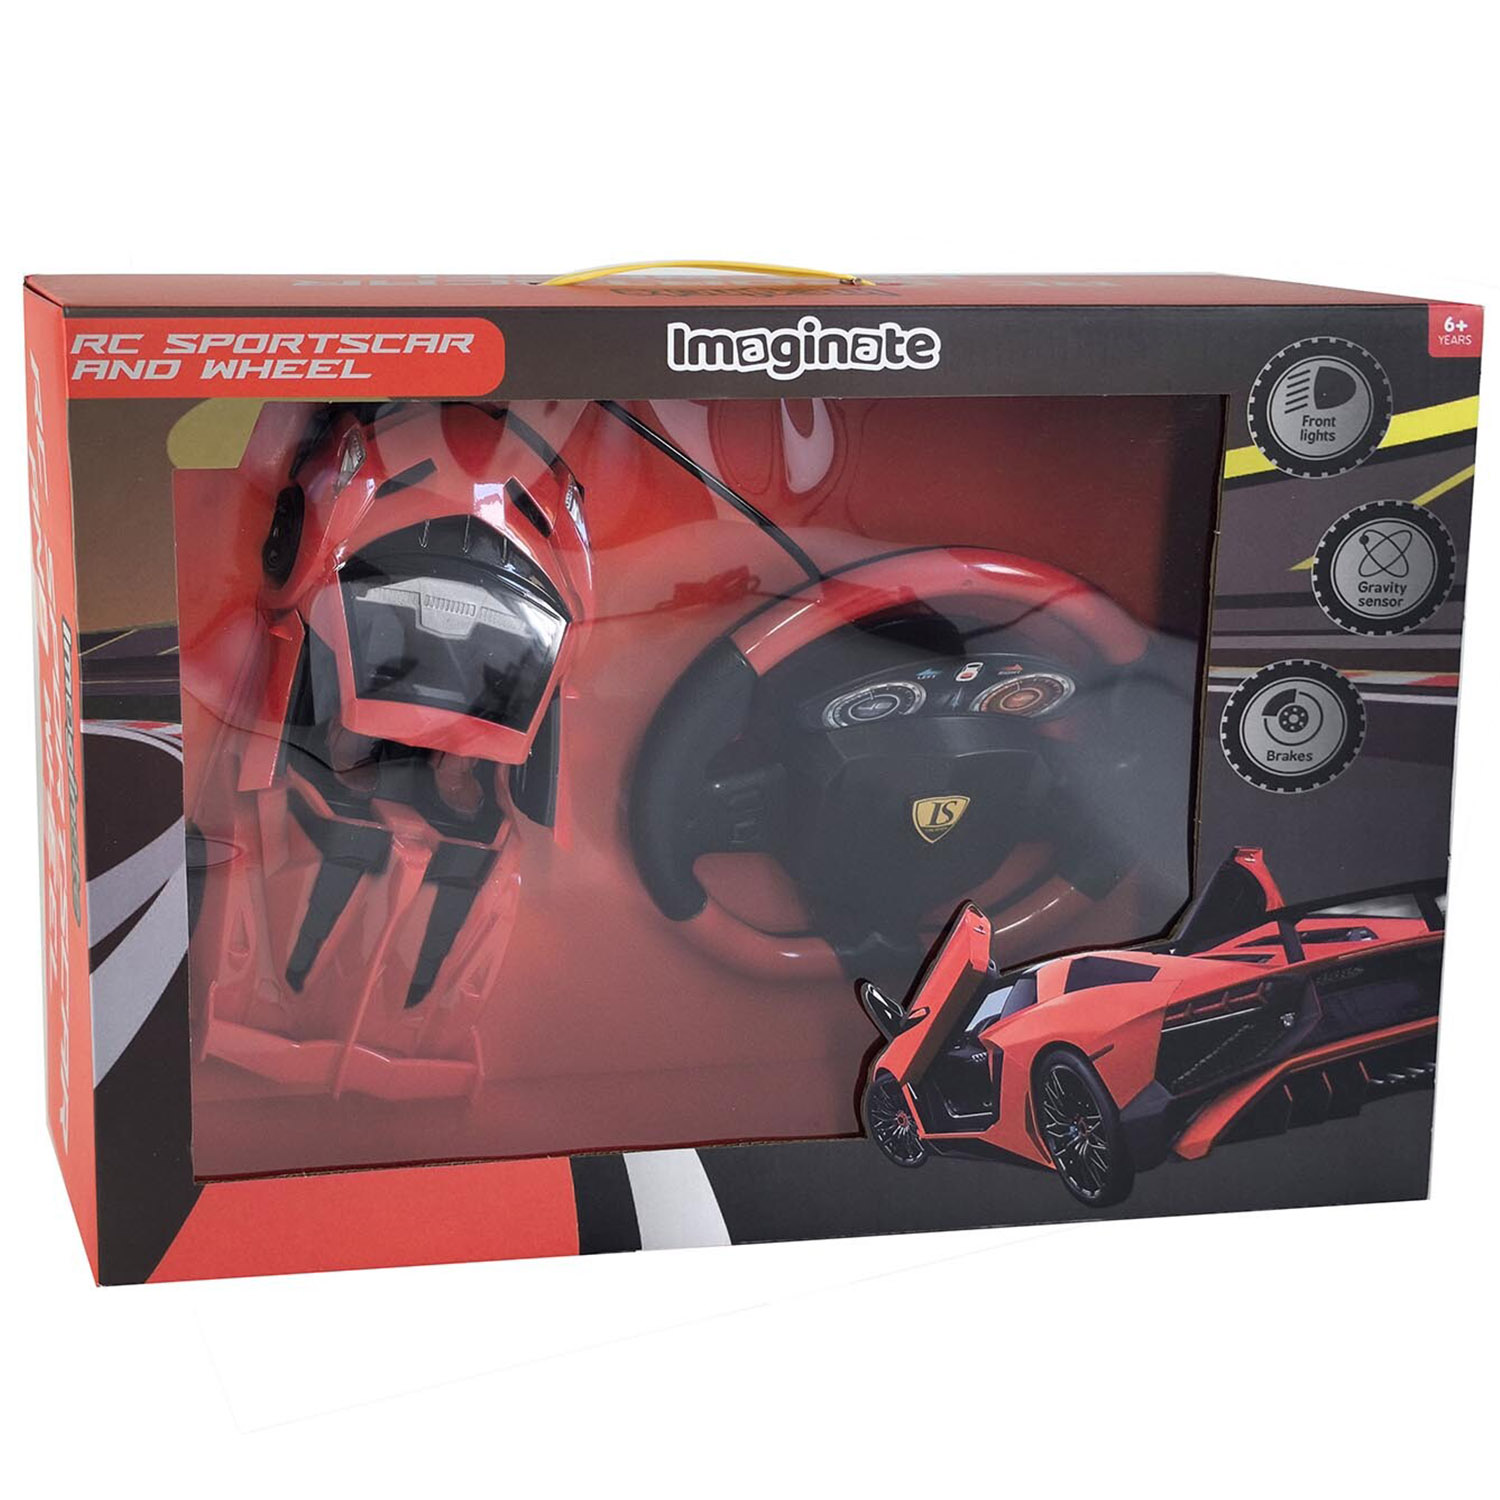 Imaginate Red RC Sportscar and Wheel Remote Control Toy Image